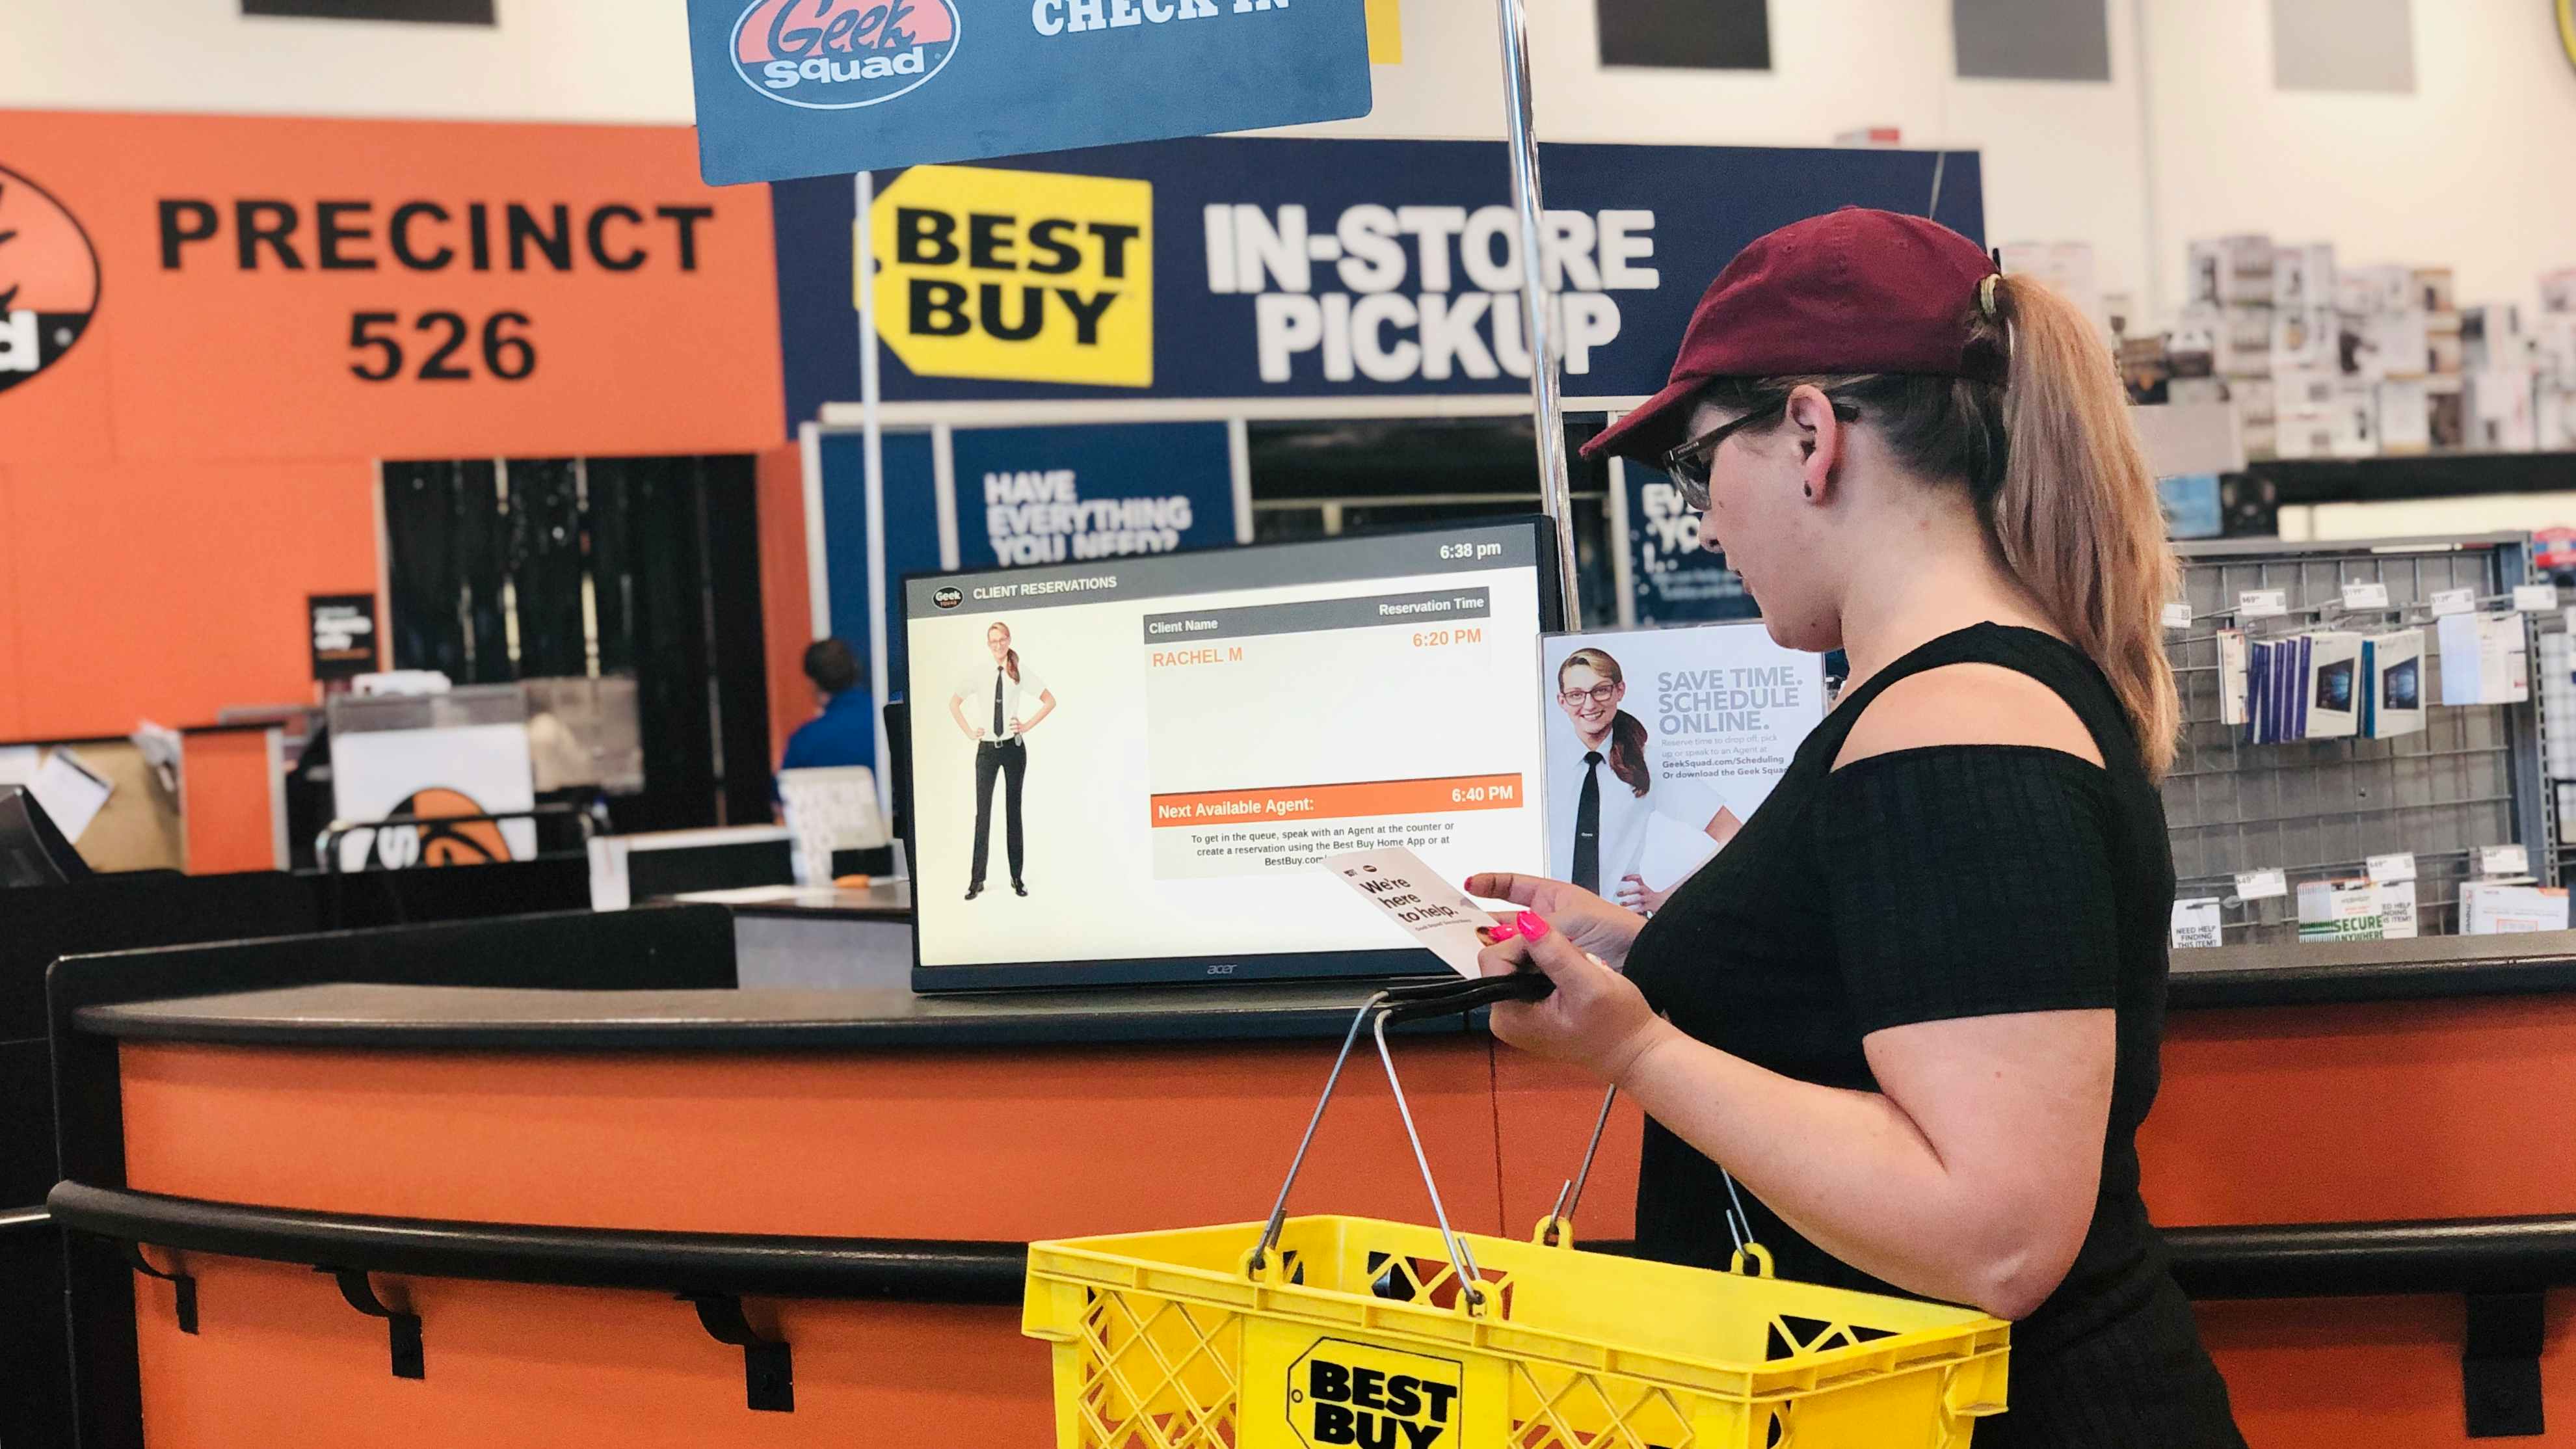 Here's One Money-Saving Tip if You're Shopping at Best Buy - CNET